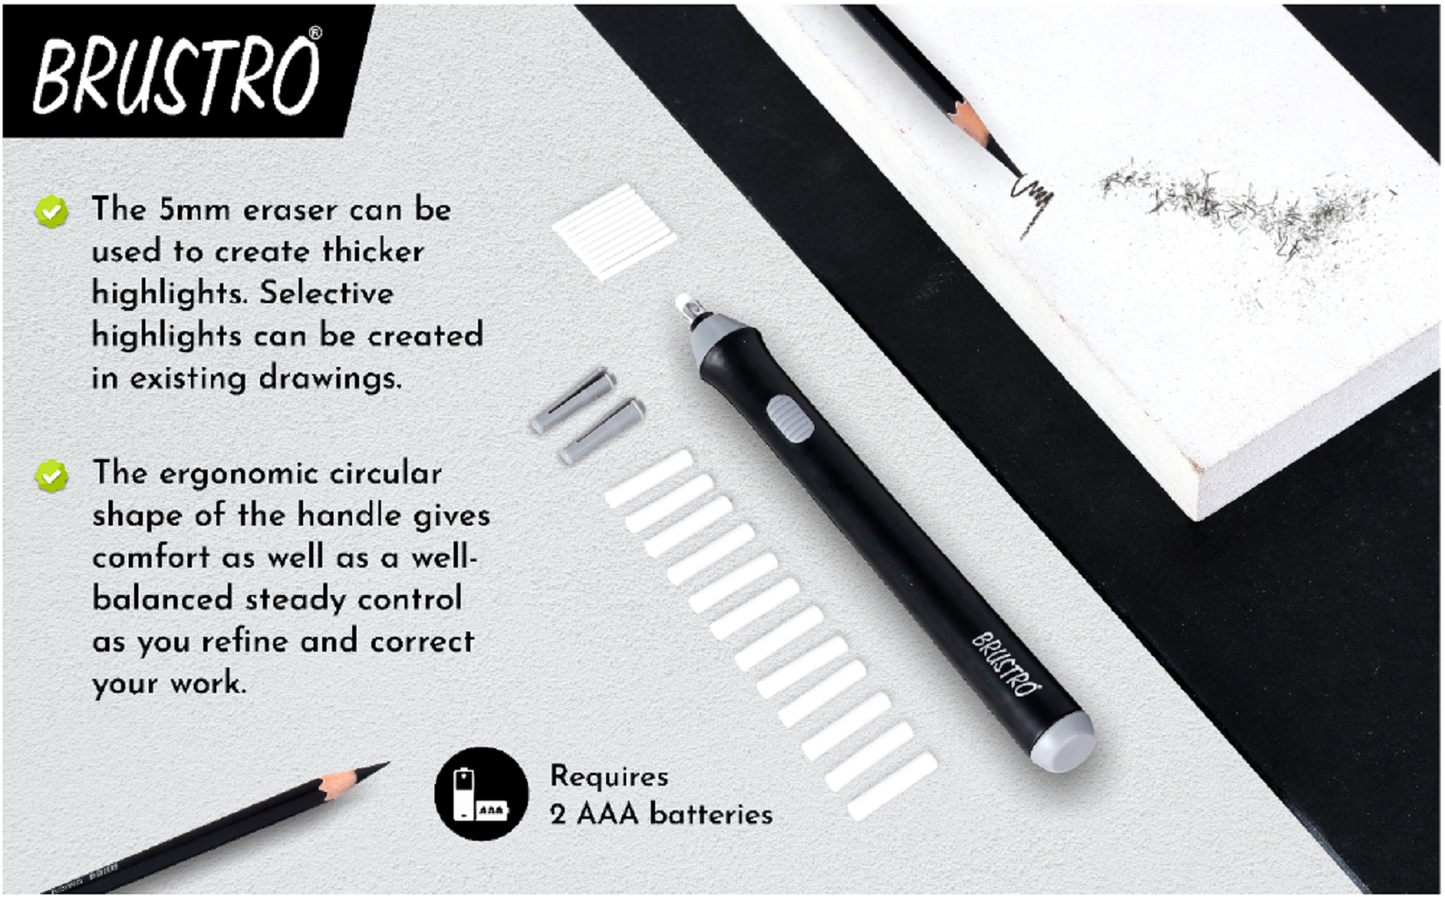 Brustro Slim Battery Operated Automatic Eraser, with 22 Refills and 2 Eraser Holders